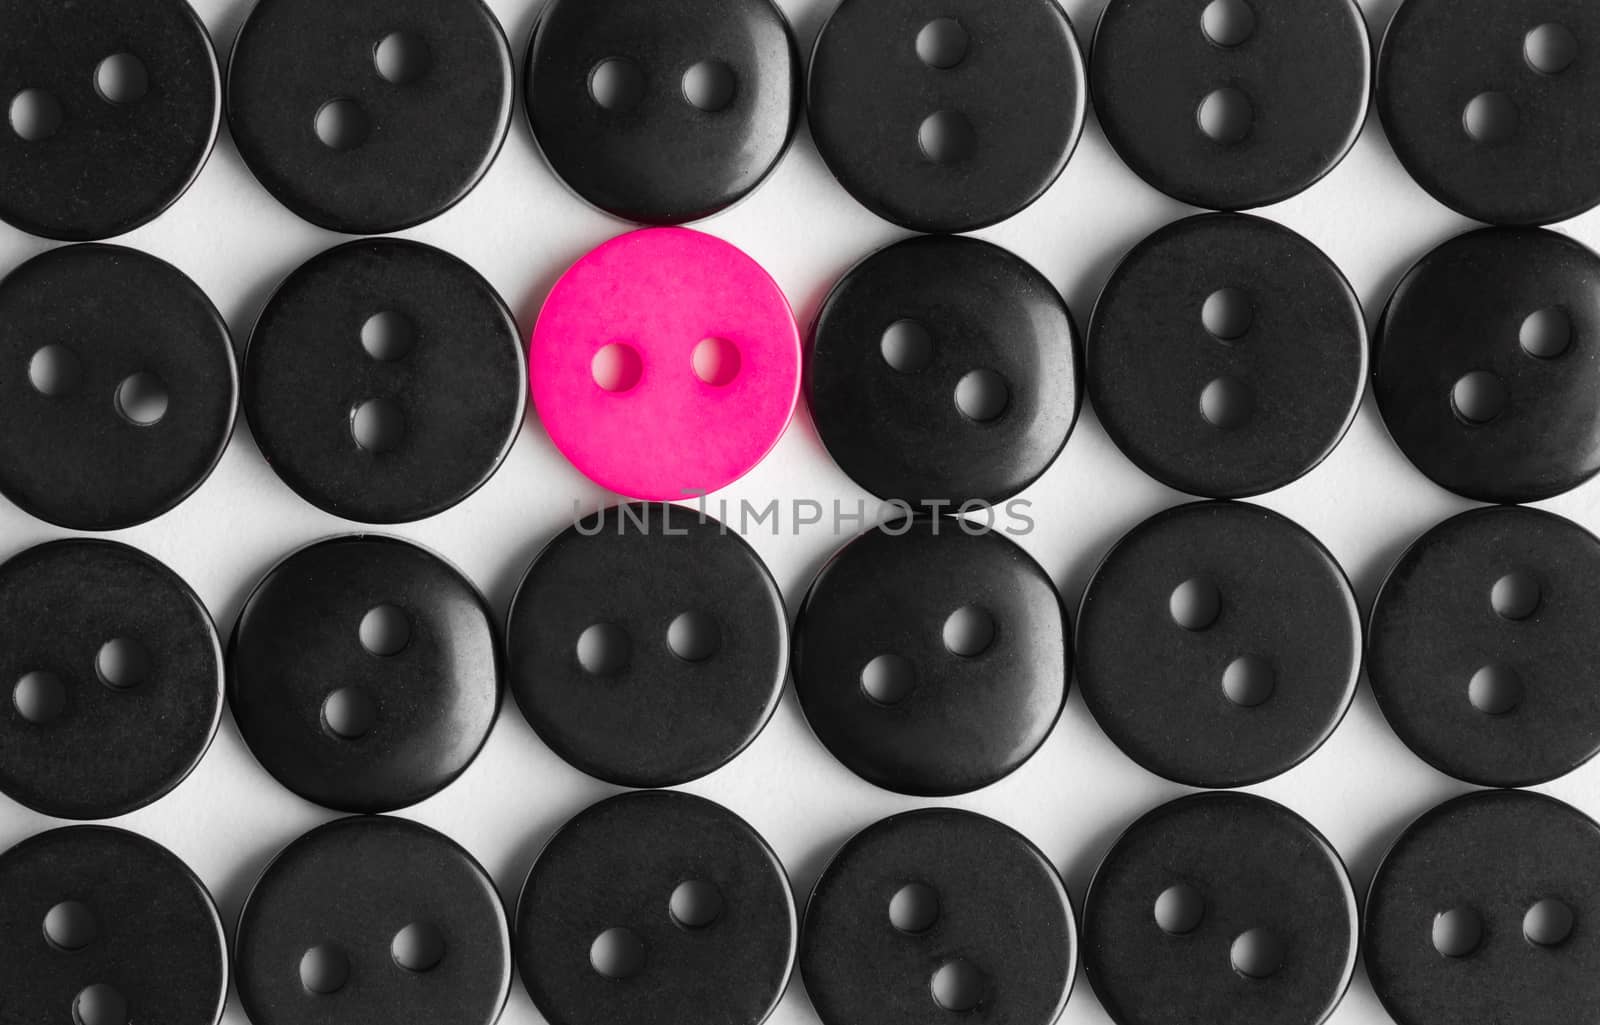 several rows of black buttons on a white background, among them the one bright pink, stands out concept, to be bright, life style